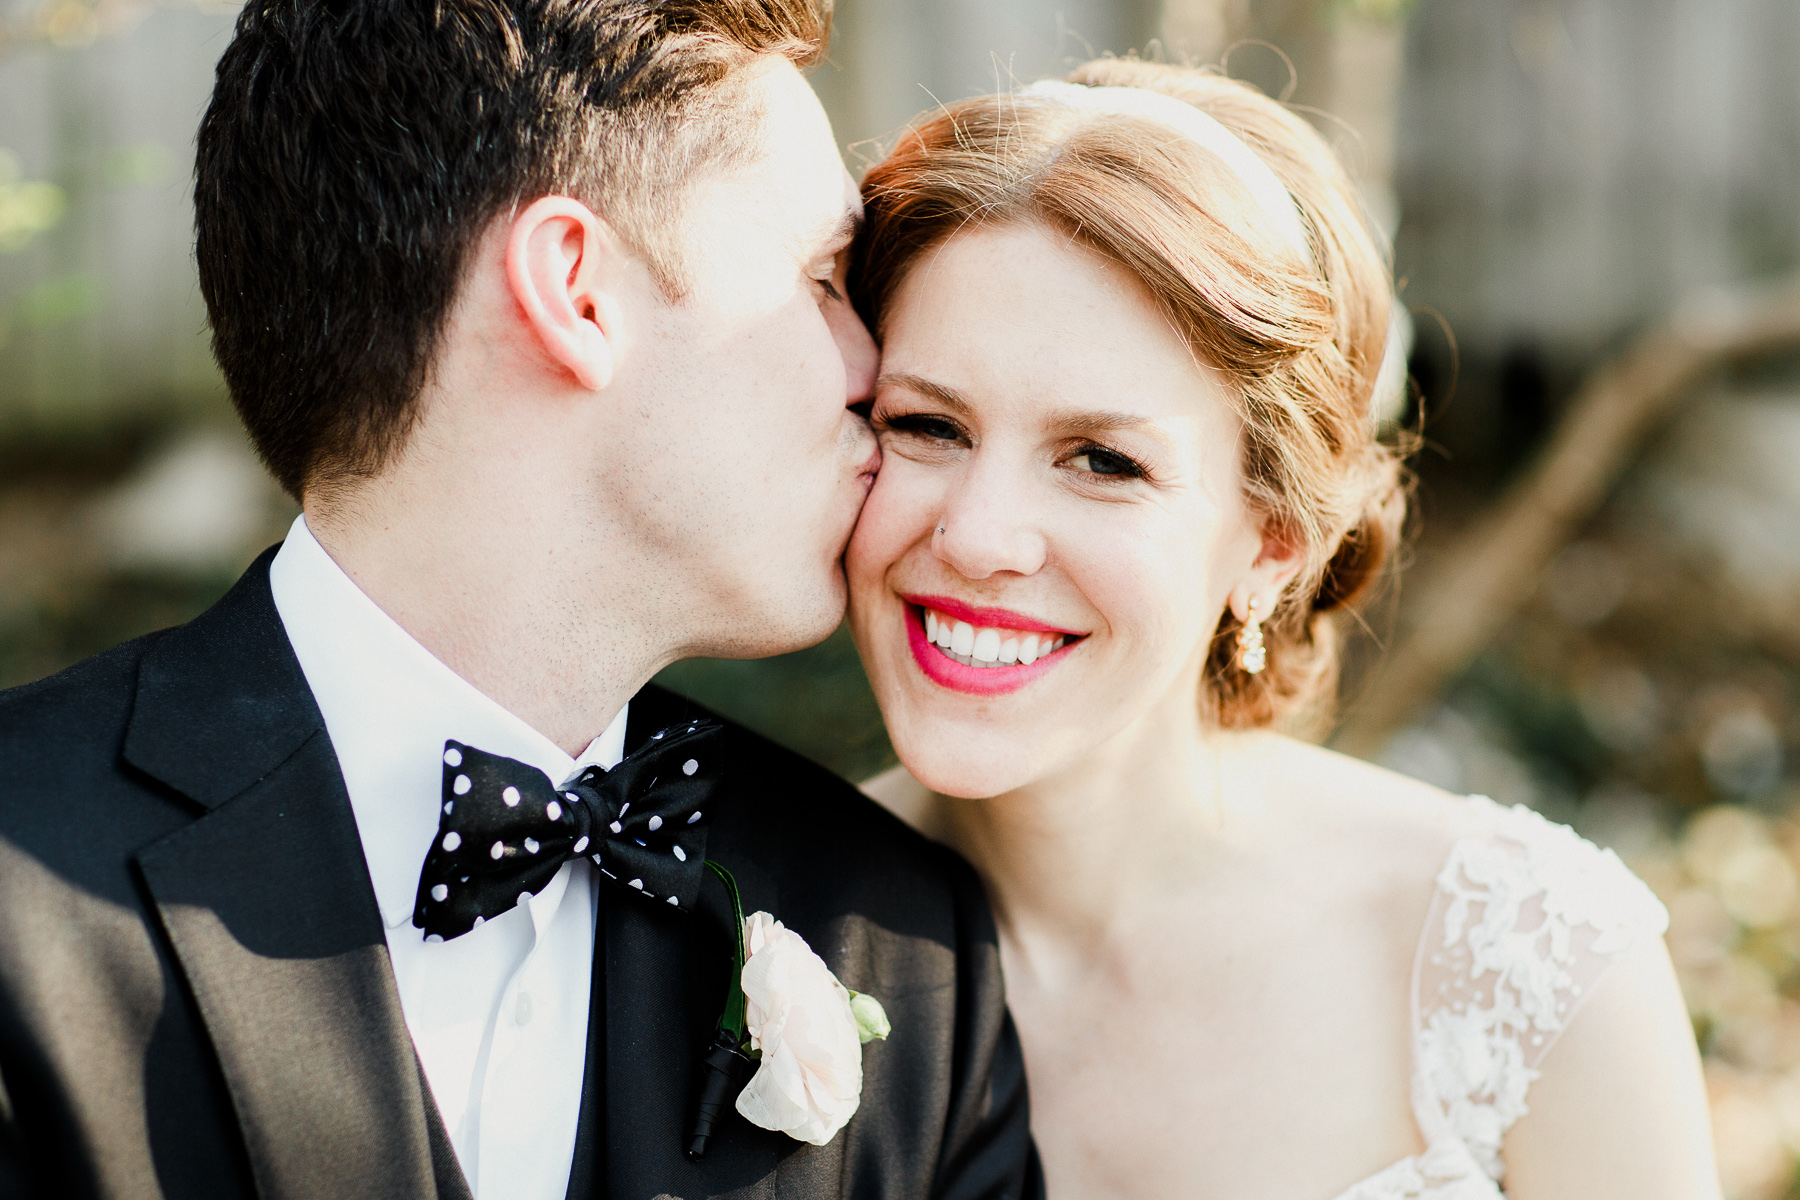 3 Tips to Dreamy Wedding Poses on Your Wedding Day